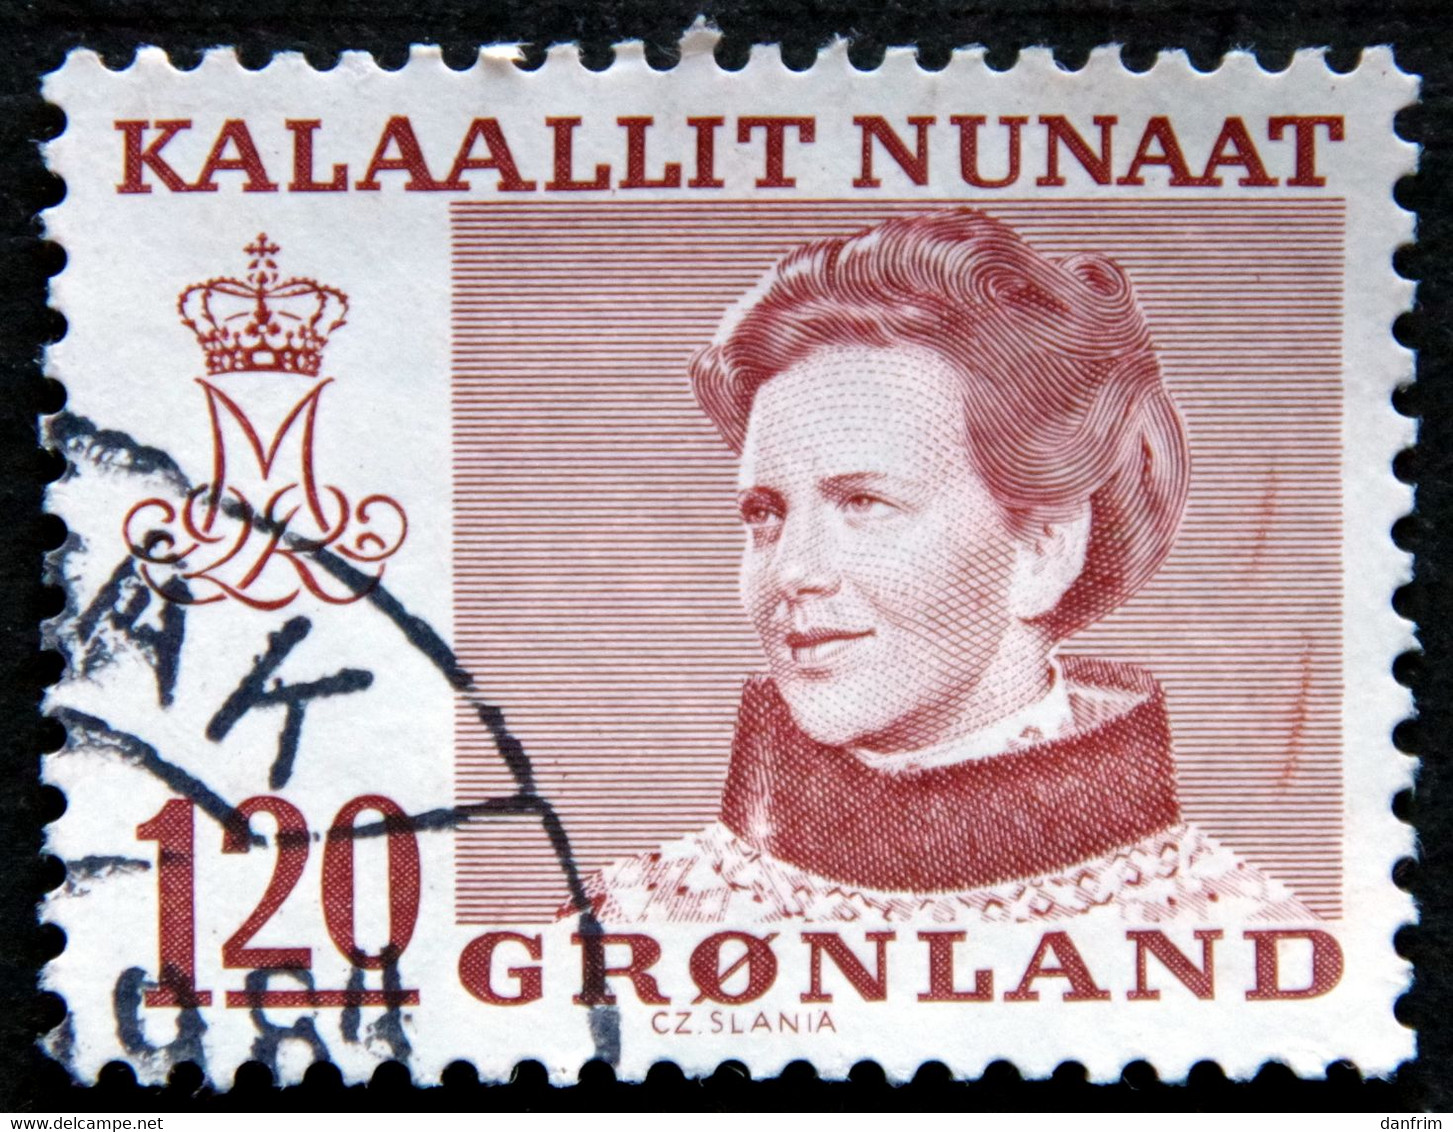 Greenland 1978 Queen Margrethe II MiNr.107   ( Lot H 857) - Usados